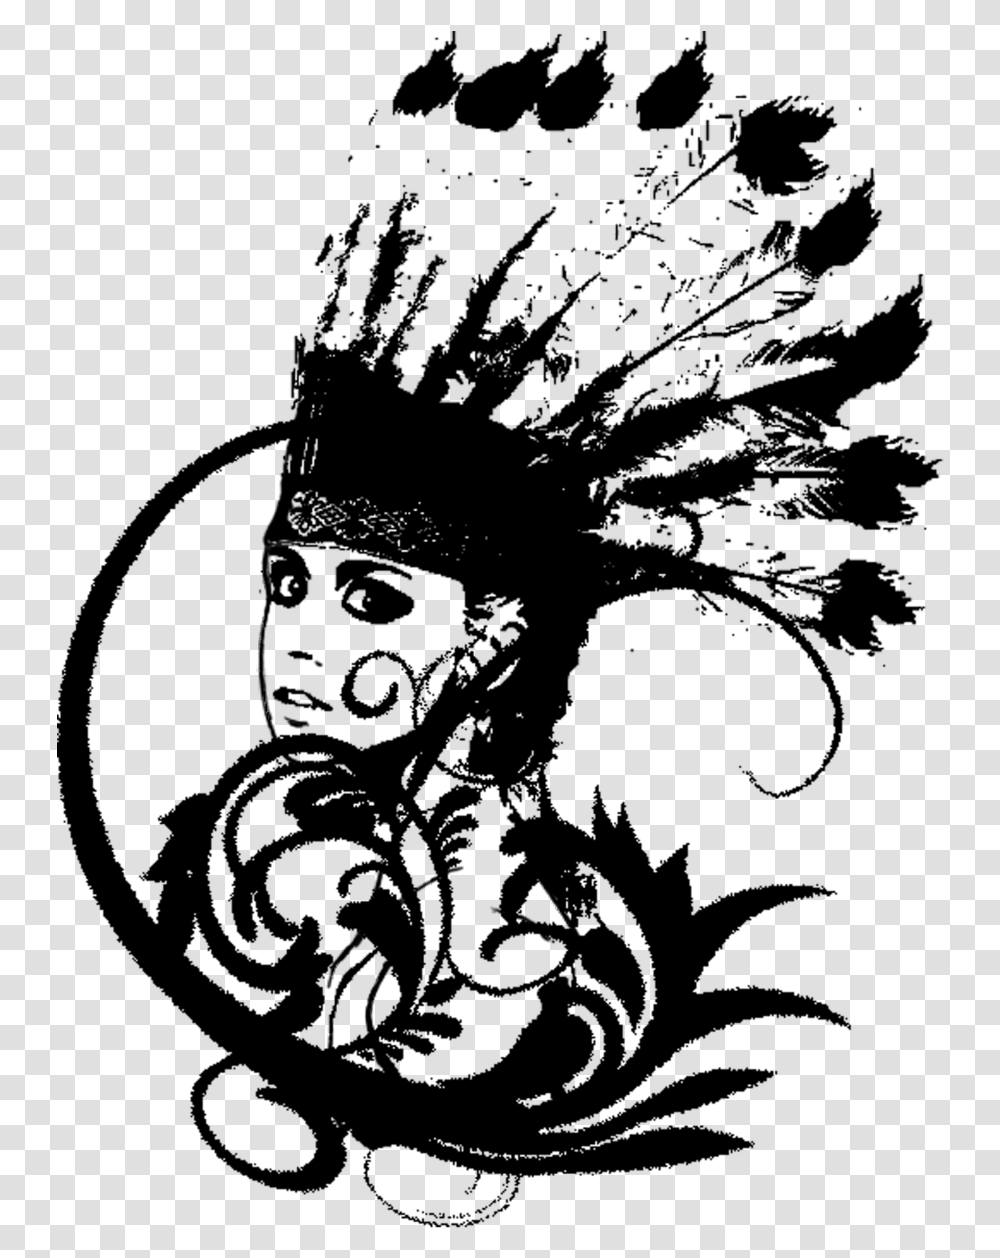 Drawing Visual Arts Silhouette Clip Art Gambar Tribal Hitam Putih, Nature, Outdoors, Astronomy, Outer Space Transparent Png